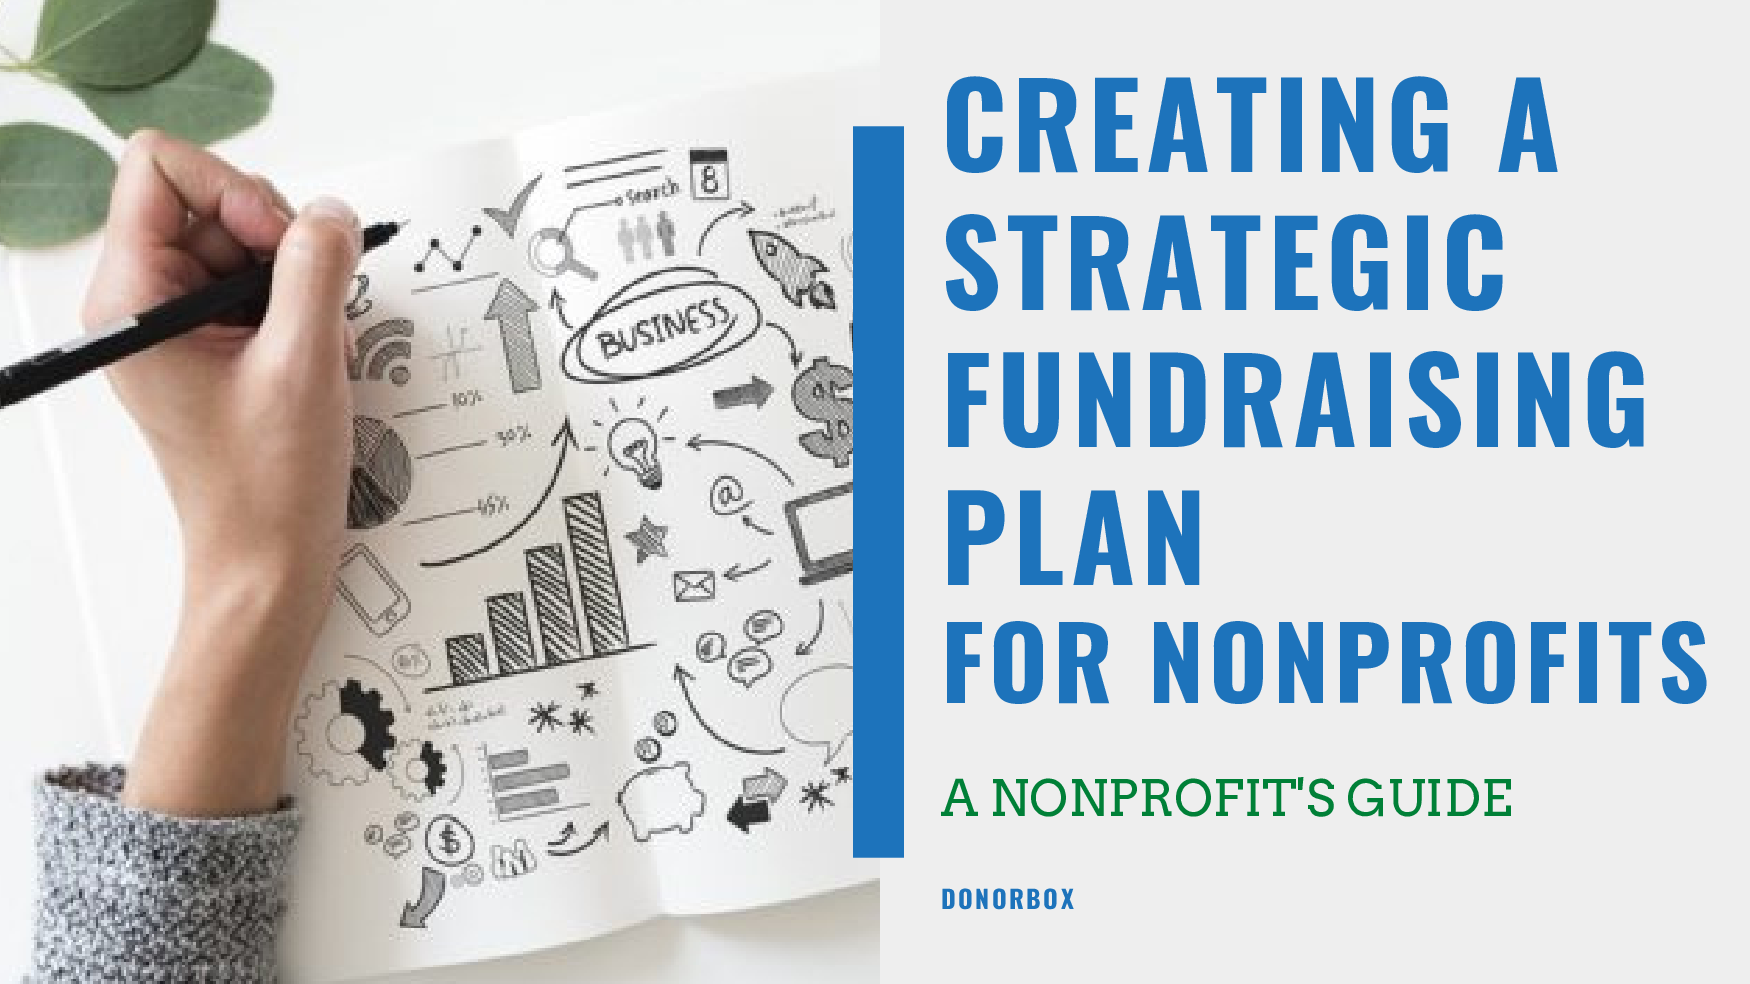 The Ultimate Guide on Creating a Strategic Fundraising Plan for Nonprofits